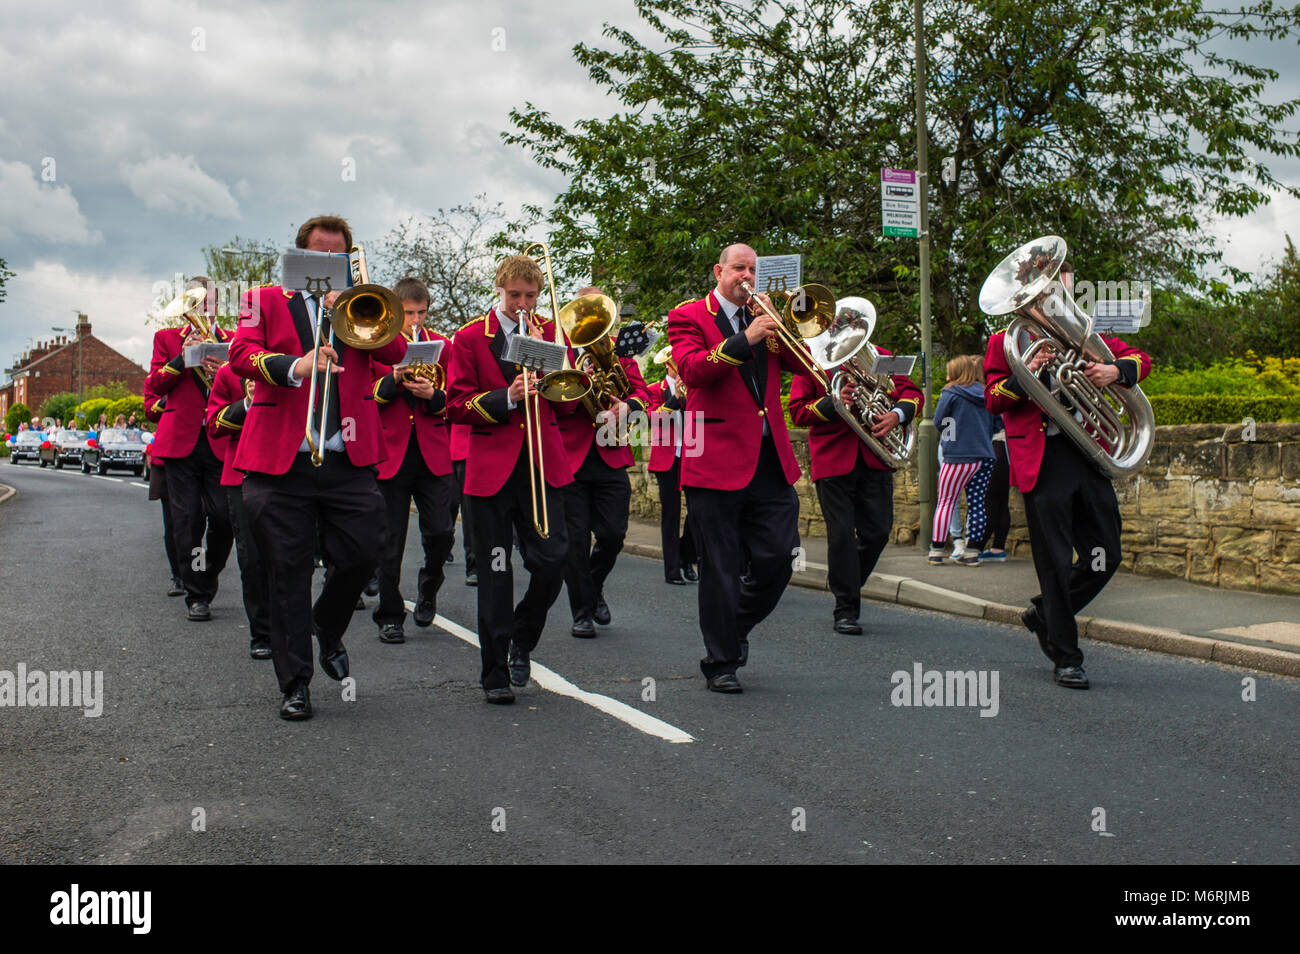 Melbourne town band playing while marching. Stock Photo